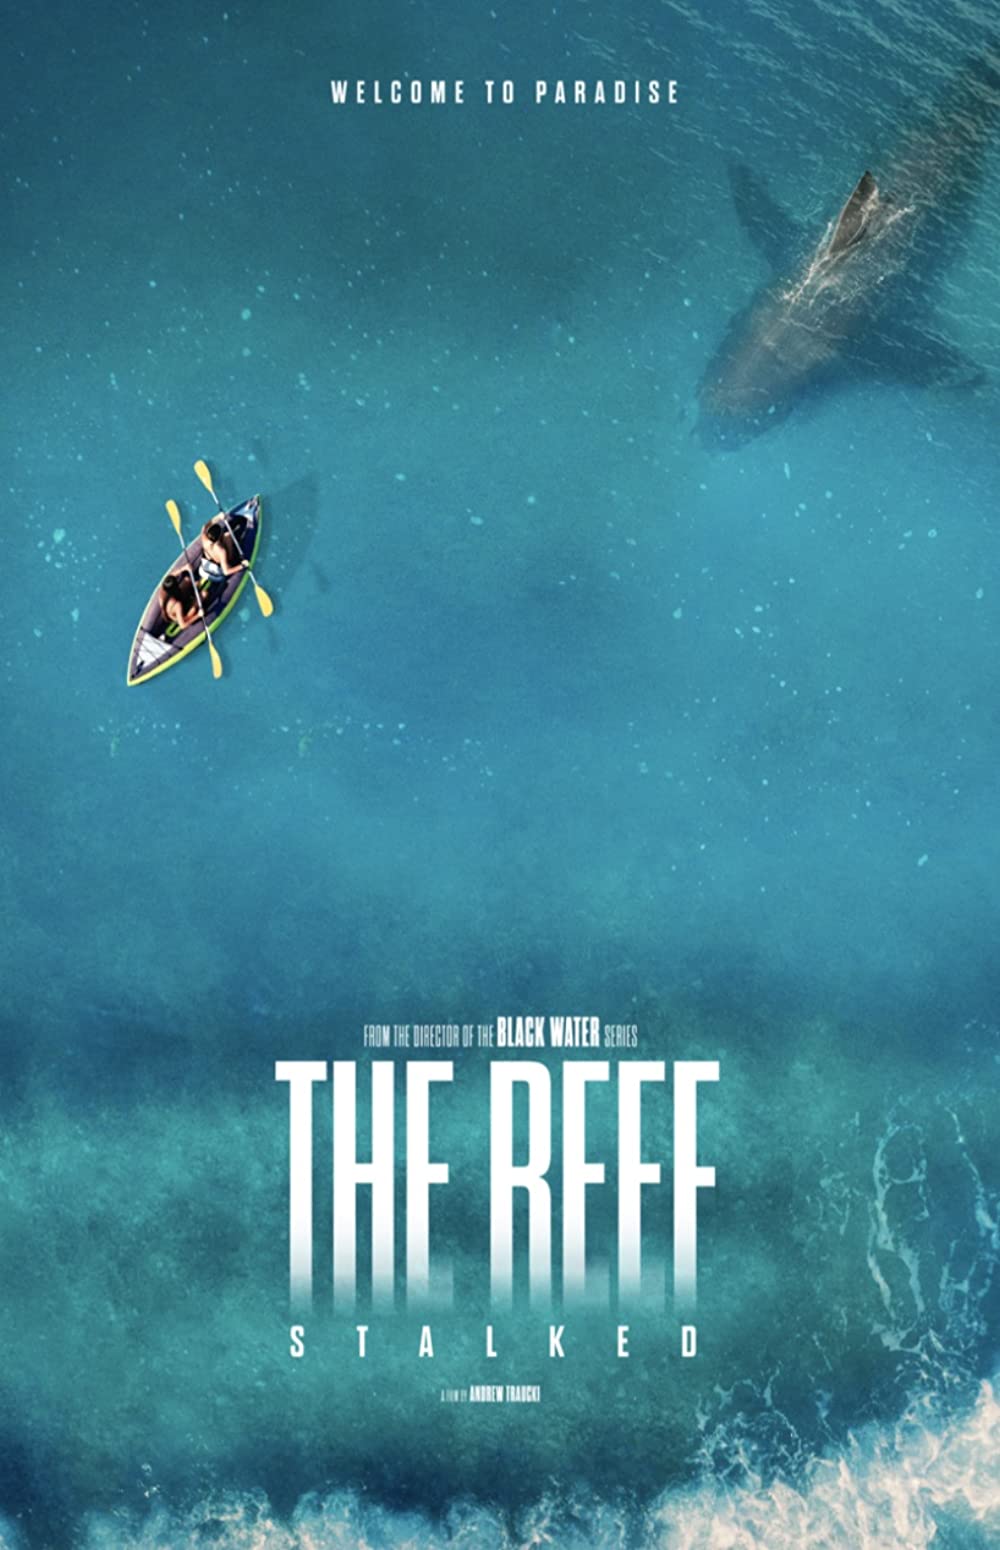 Where to stream The Reef Stalked (2022)